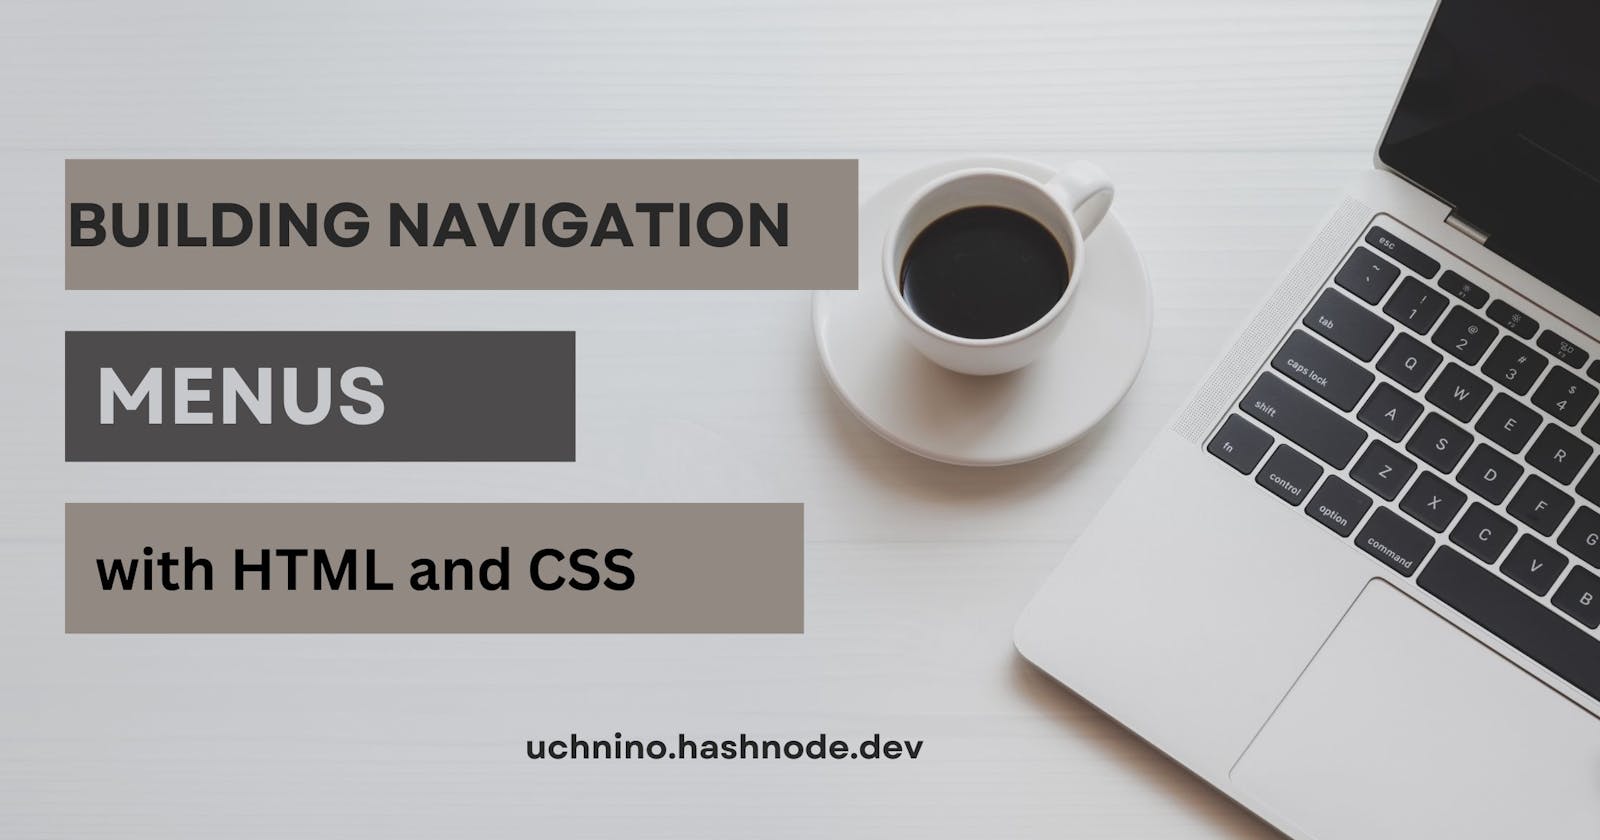 Building Navigation Menus with HTML and CSS